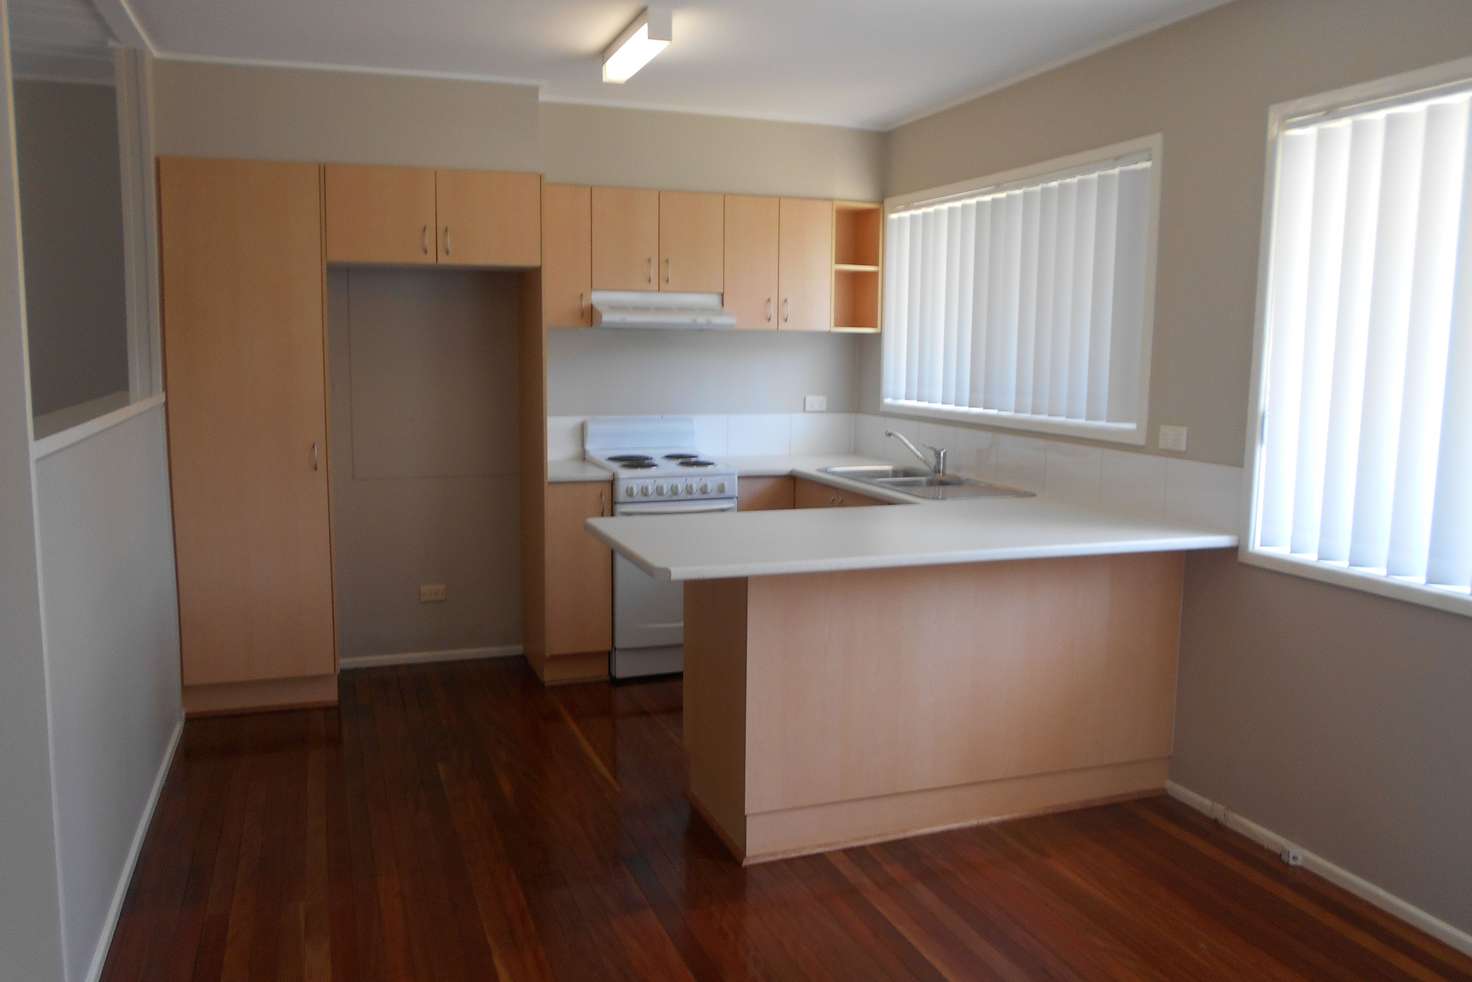 Main view of Homely house listing, 11 Hilliard Street, Ormiston QLD 4160